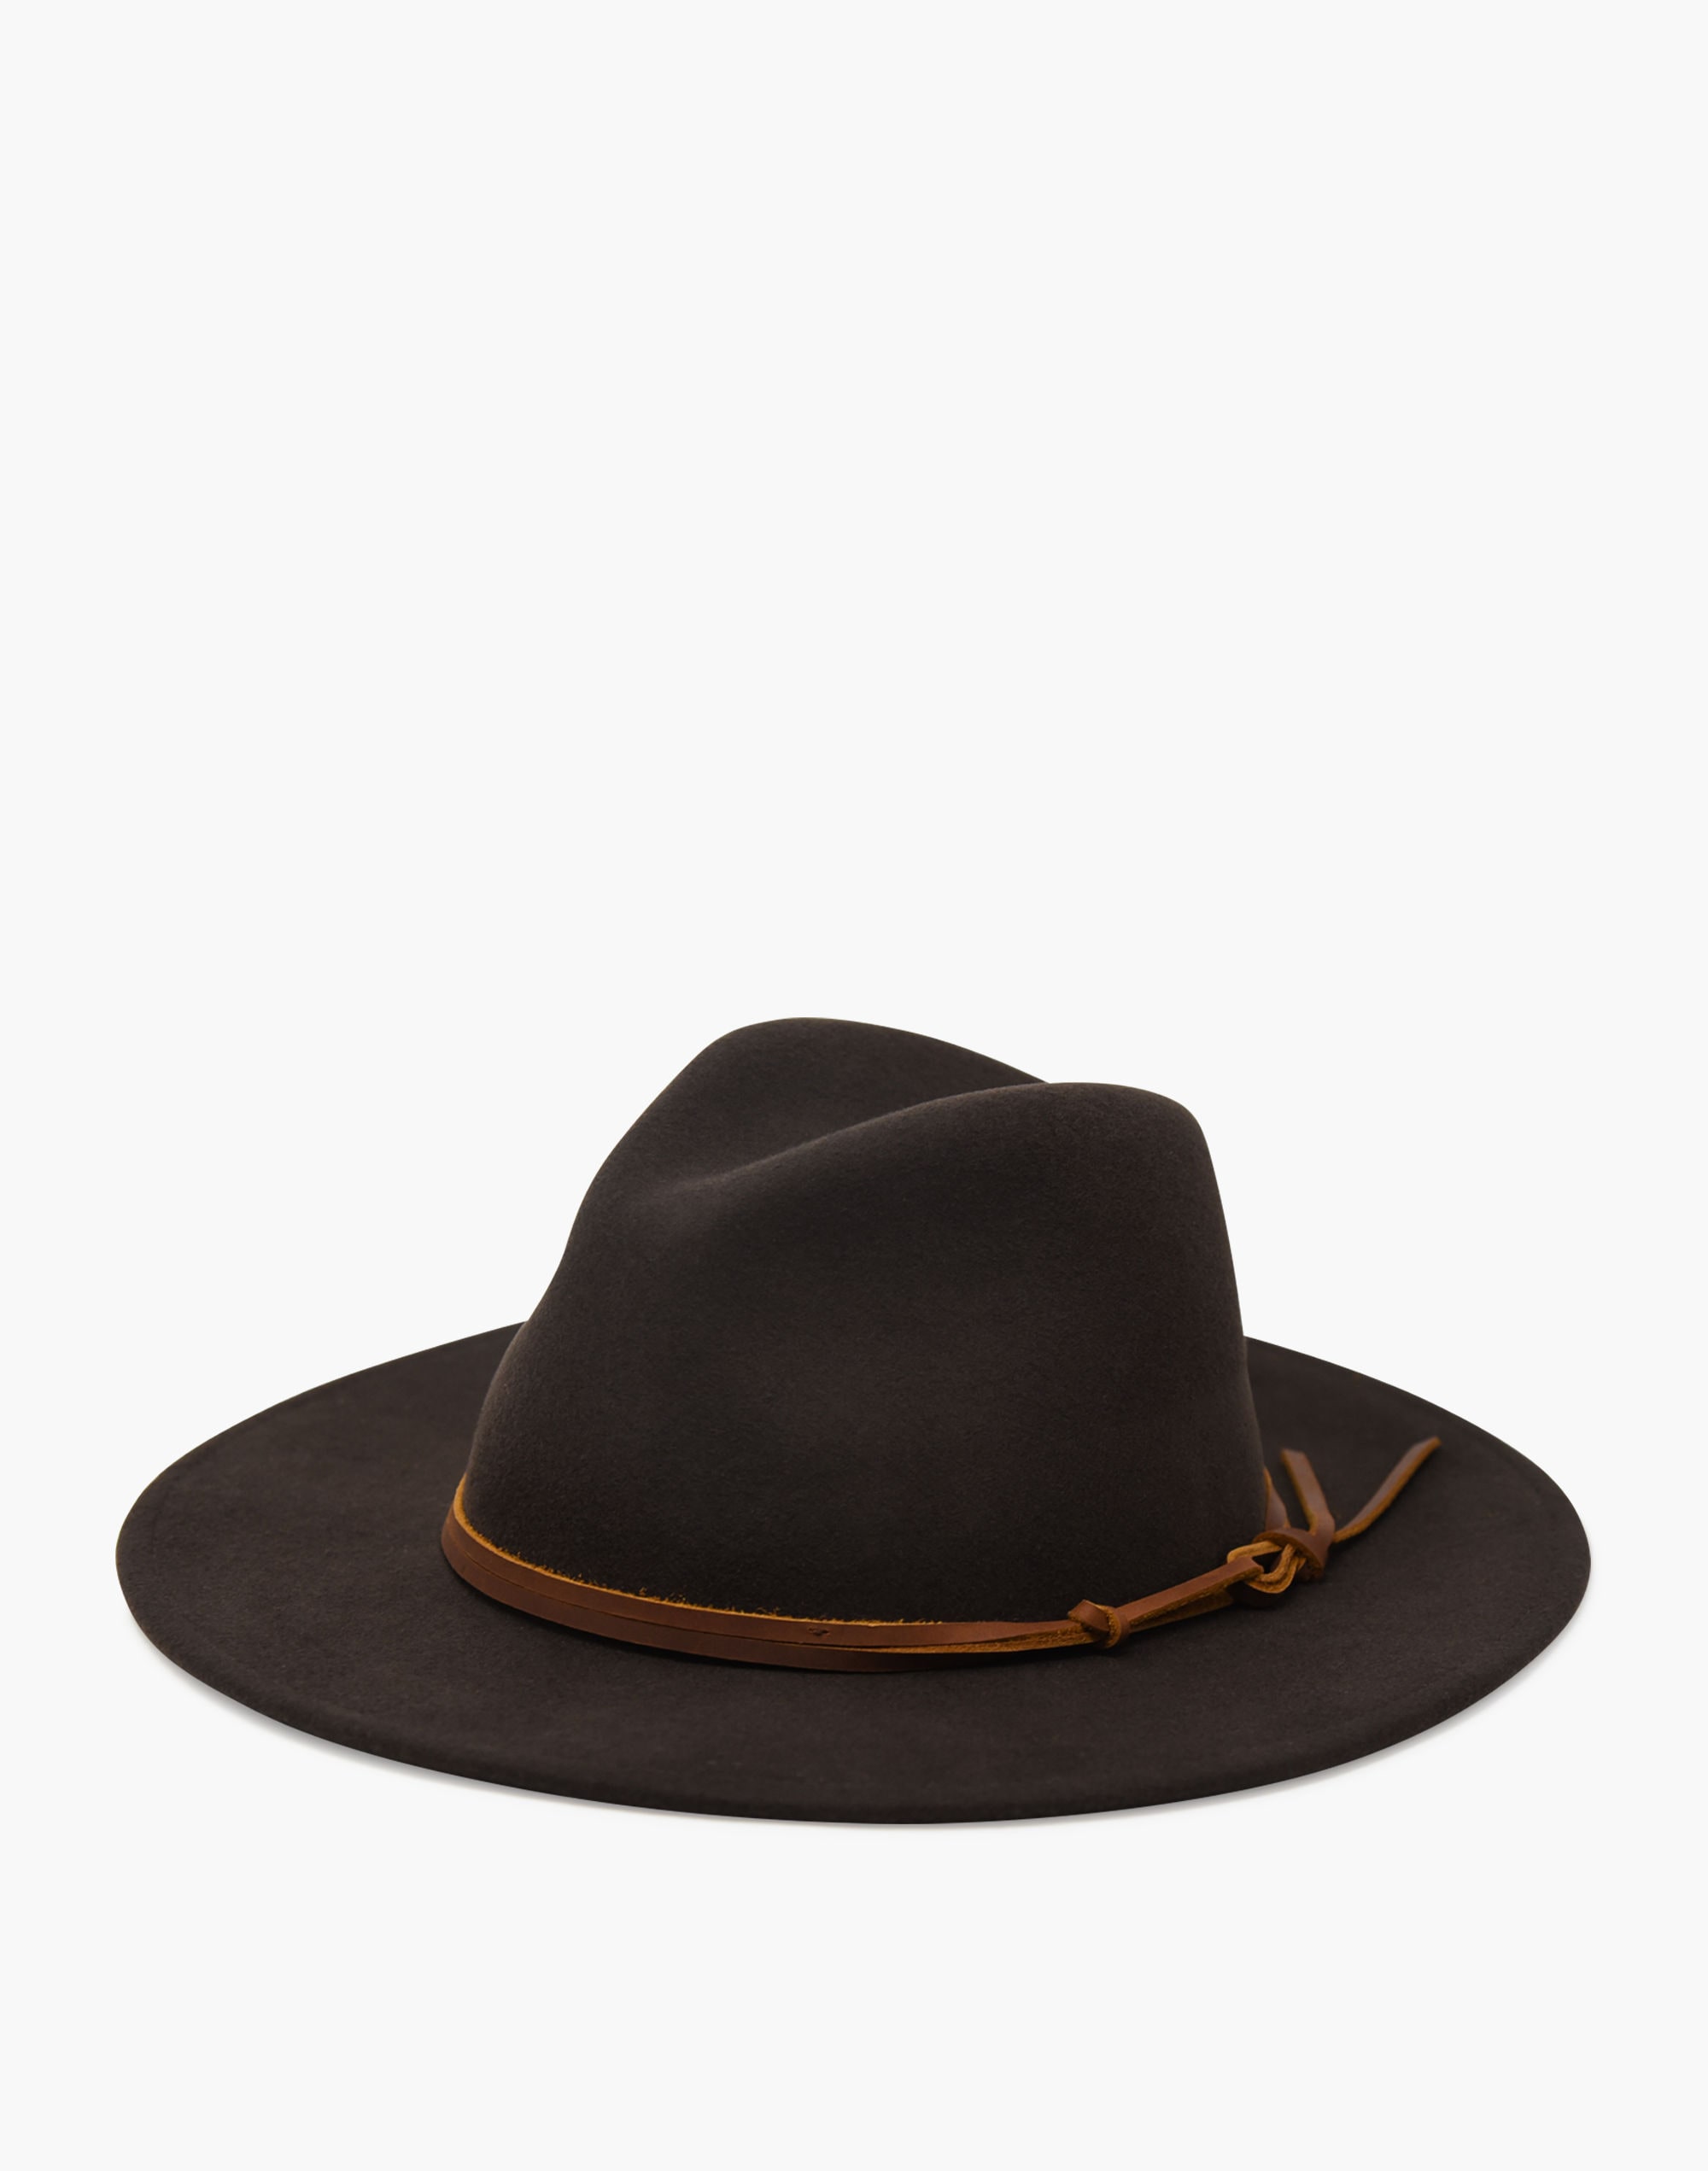 River Hat by Wyeth in Black/Brown